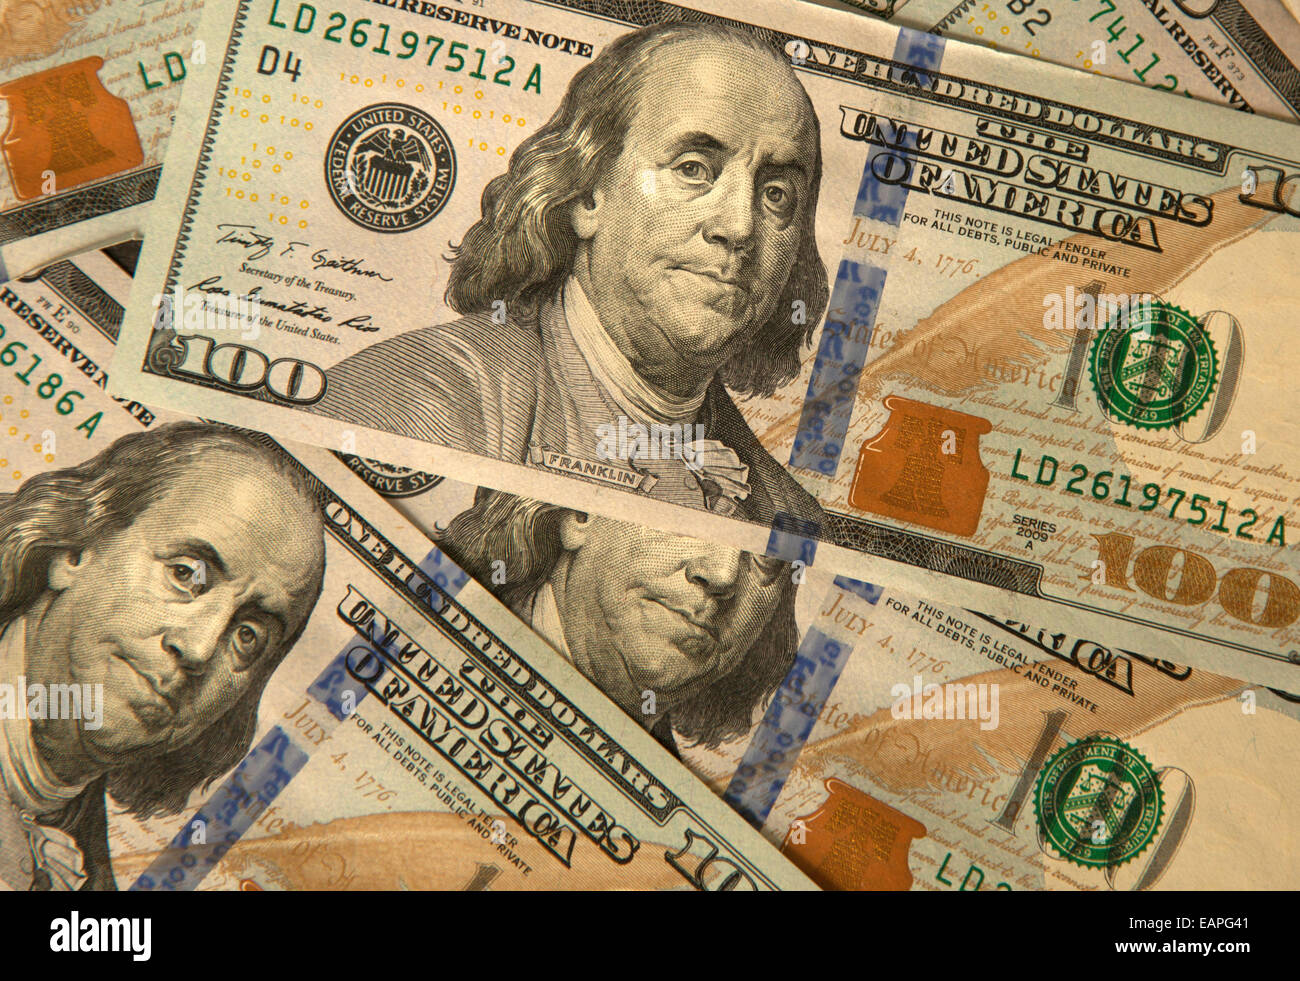 Newest US $100 bills as of 2013 with an embedded magnetic strip among other qualities difficult to forge. Stock Photo